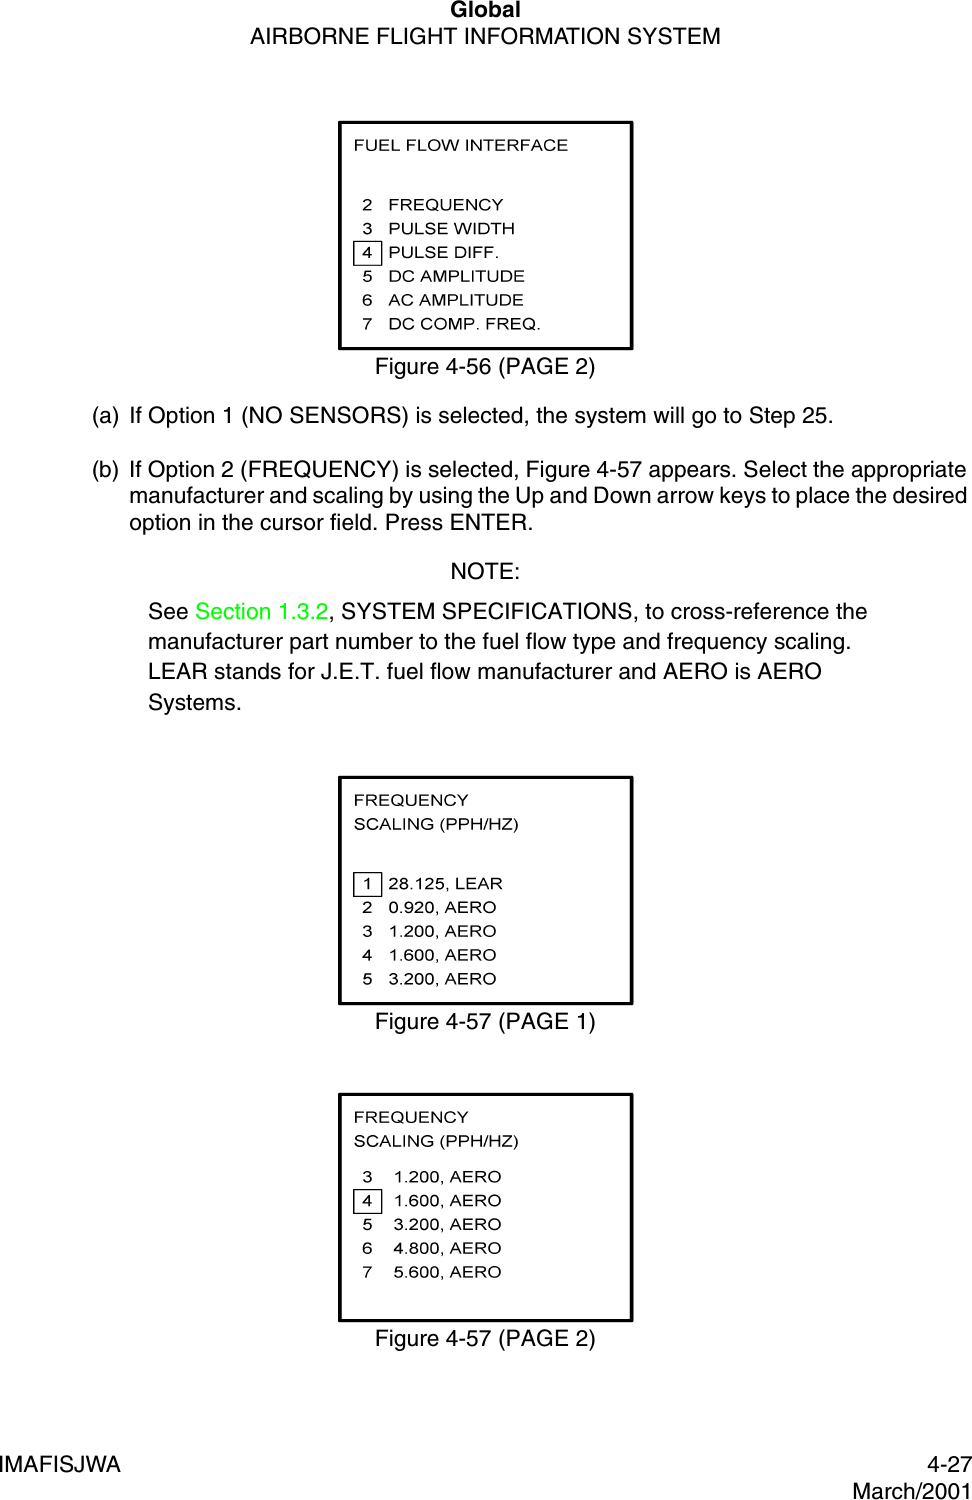 GlobalAIRBORNE FLIGHT INFORMATION SYSTEMIMAFISJWA 4-27March/2001Figure 4-56 (PAGE 2)(a) If Option 1 (NO SENSORS) is selected, the system will go to Step 25.(b) If Option 2 (FREQUENCY) is selected, Figure 4-57 appears. Select the appropriate manufacturer and scaling by using the Up and Down arrow keys to place the desired option in the cursor field. Press ENTER.NOTE:See Section 1.3.2, SYSTEM SPECIFICATIONS, to cross-reference the manufacturer part number to the fuel flow type and frequency scaling. LEAR stands for J.E.T. fuel flow manufacturer and AERO is AERO Systems.Figure 4-57 (PAGE 1)Figure 4-57 (PAGE 2)